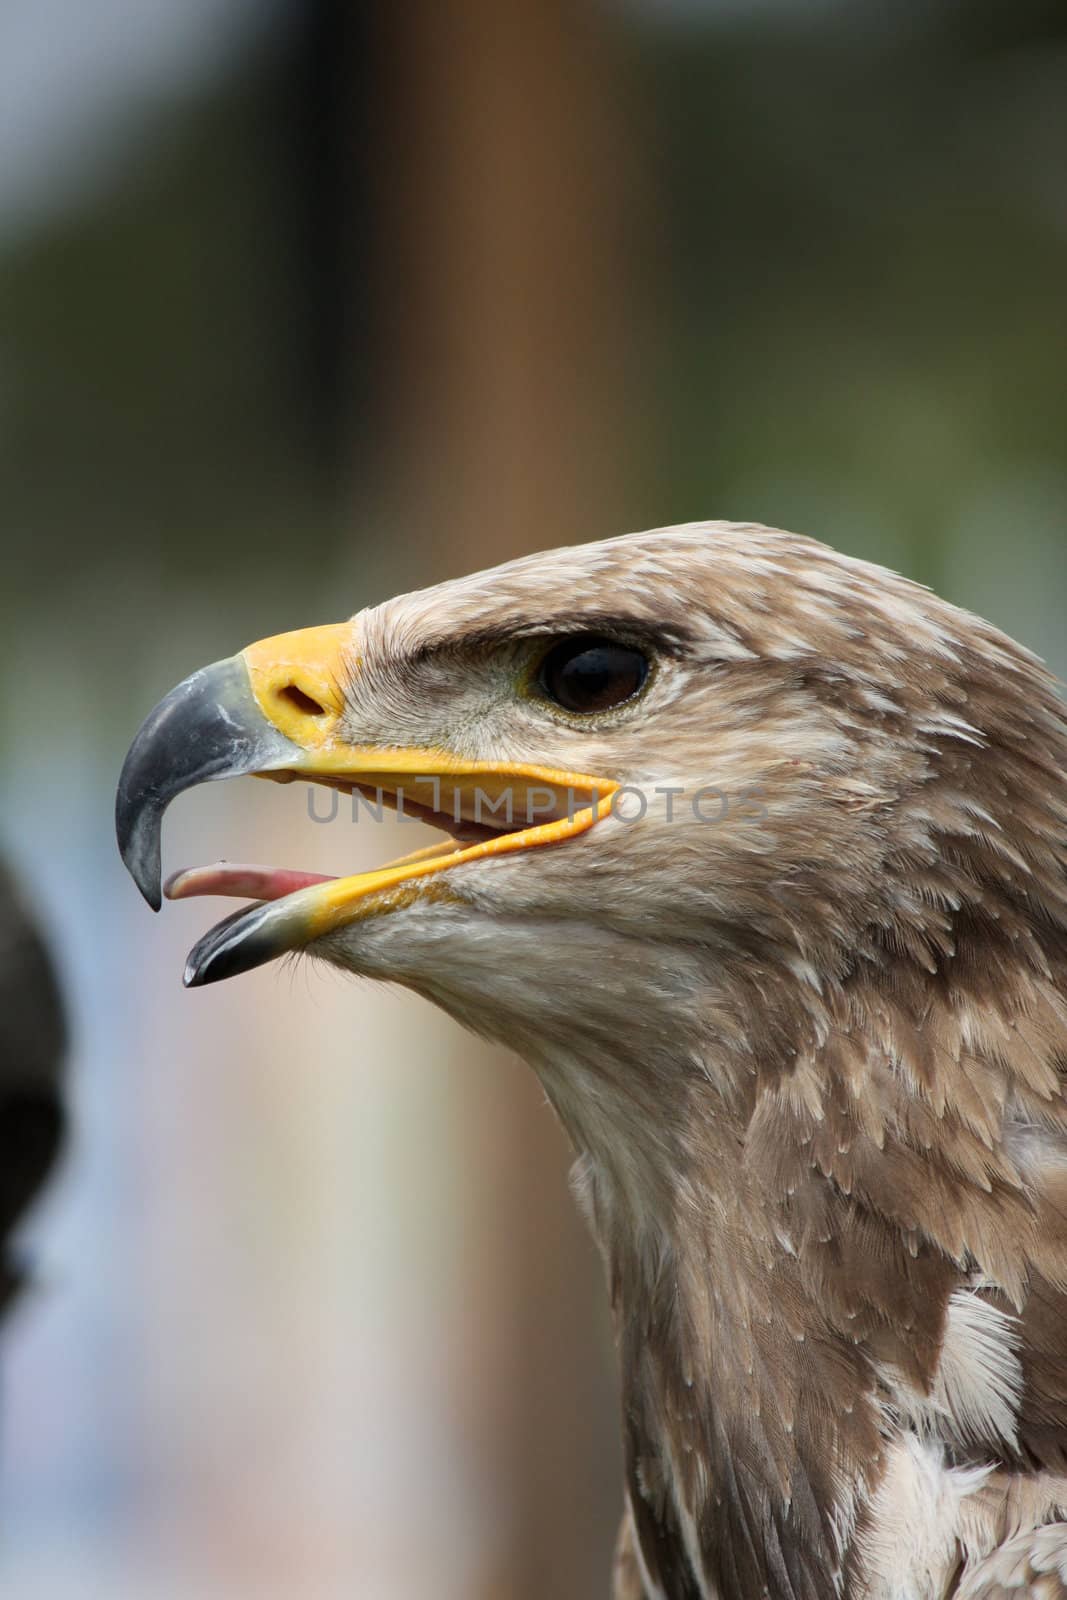 Close up view of the head of a golden eagle.